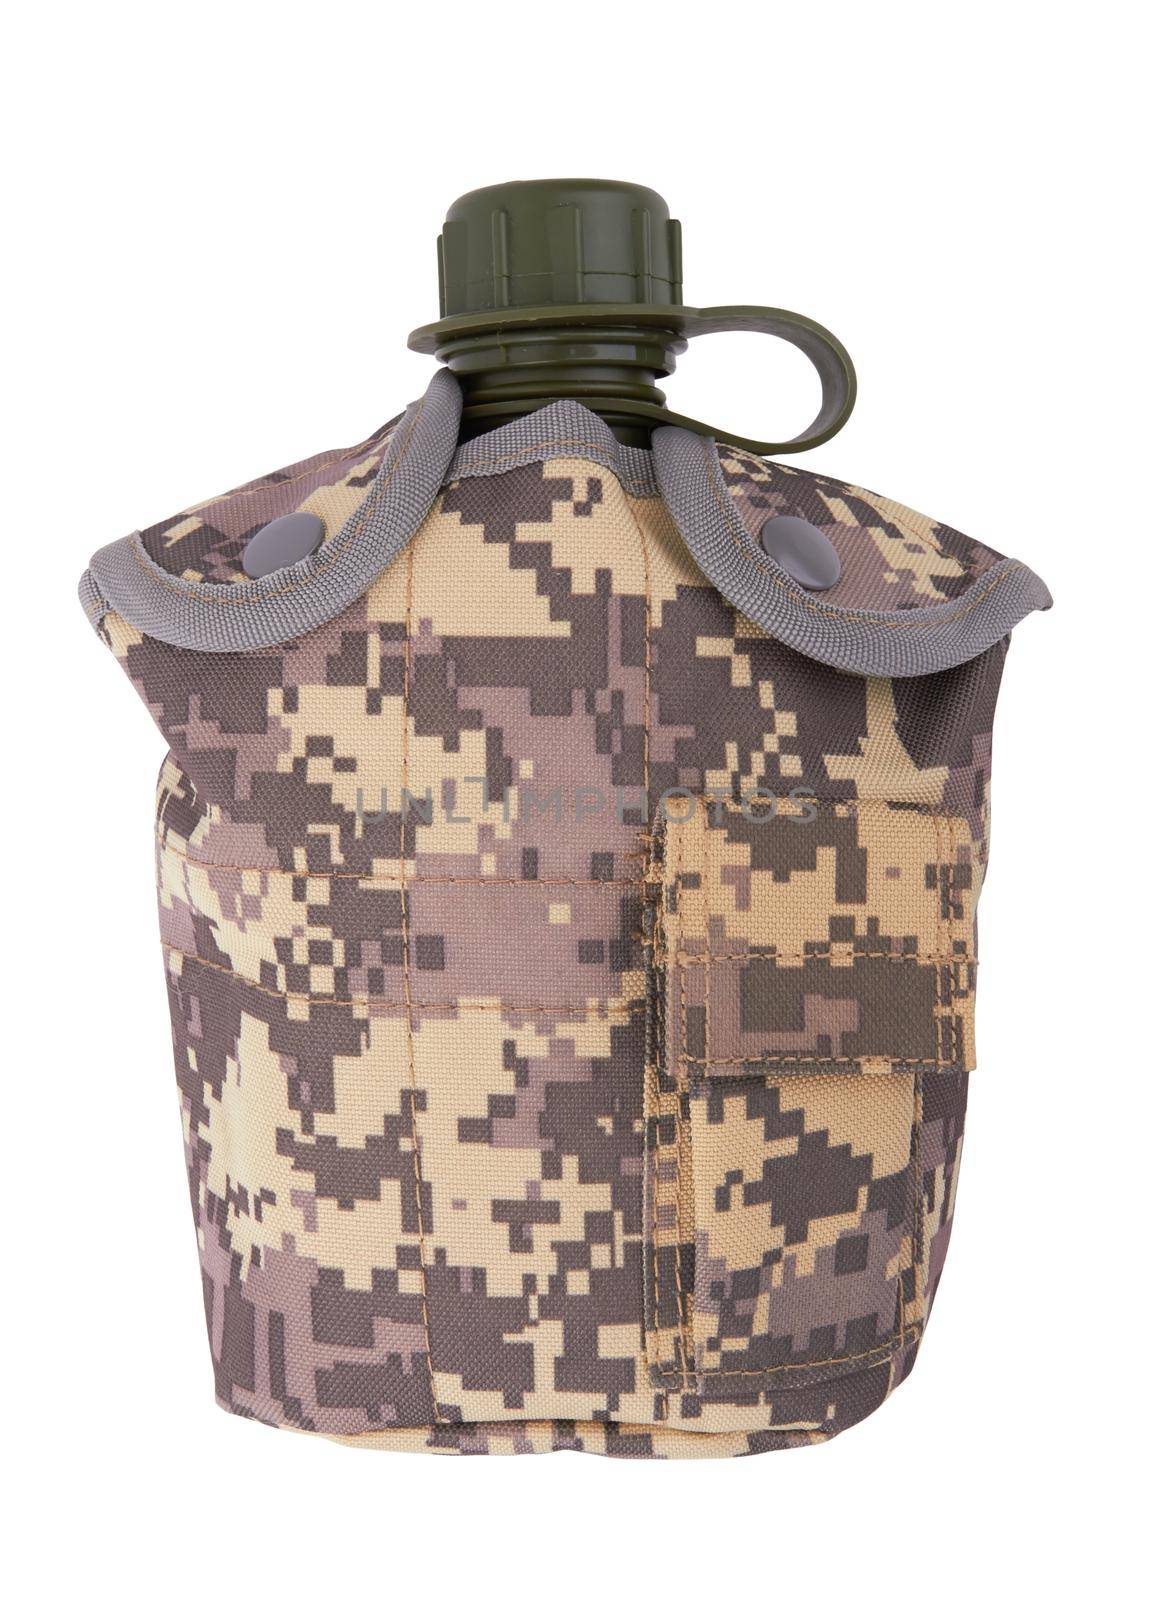 Military flask for water by pioneer111